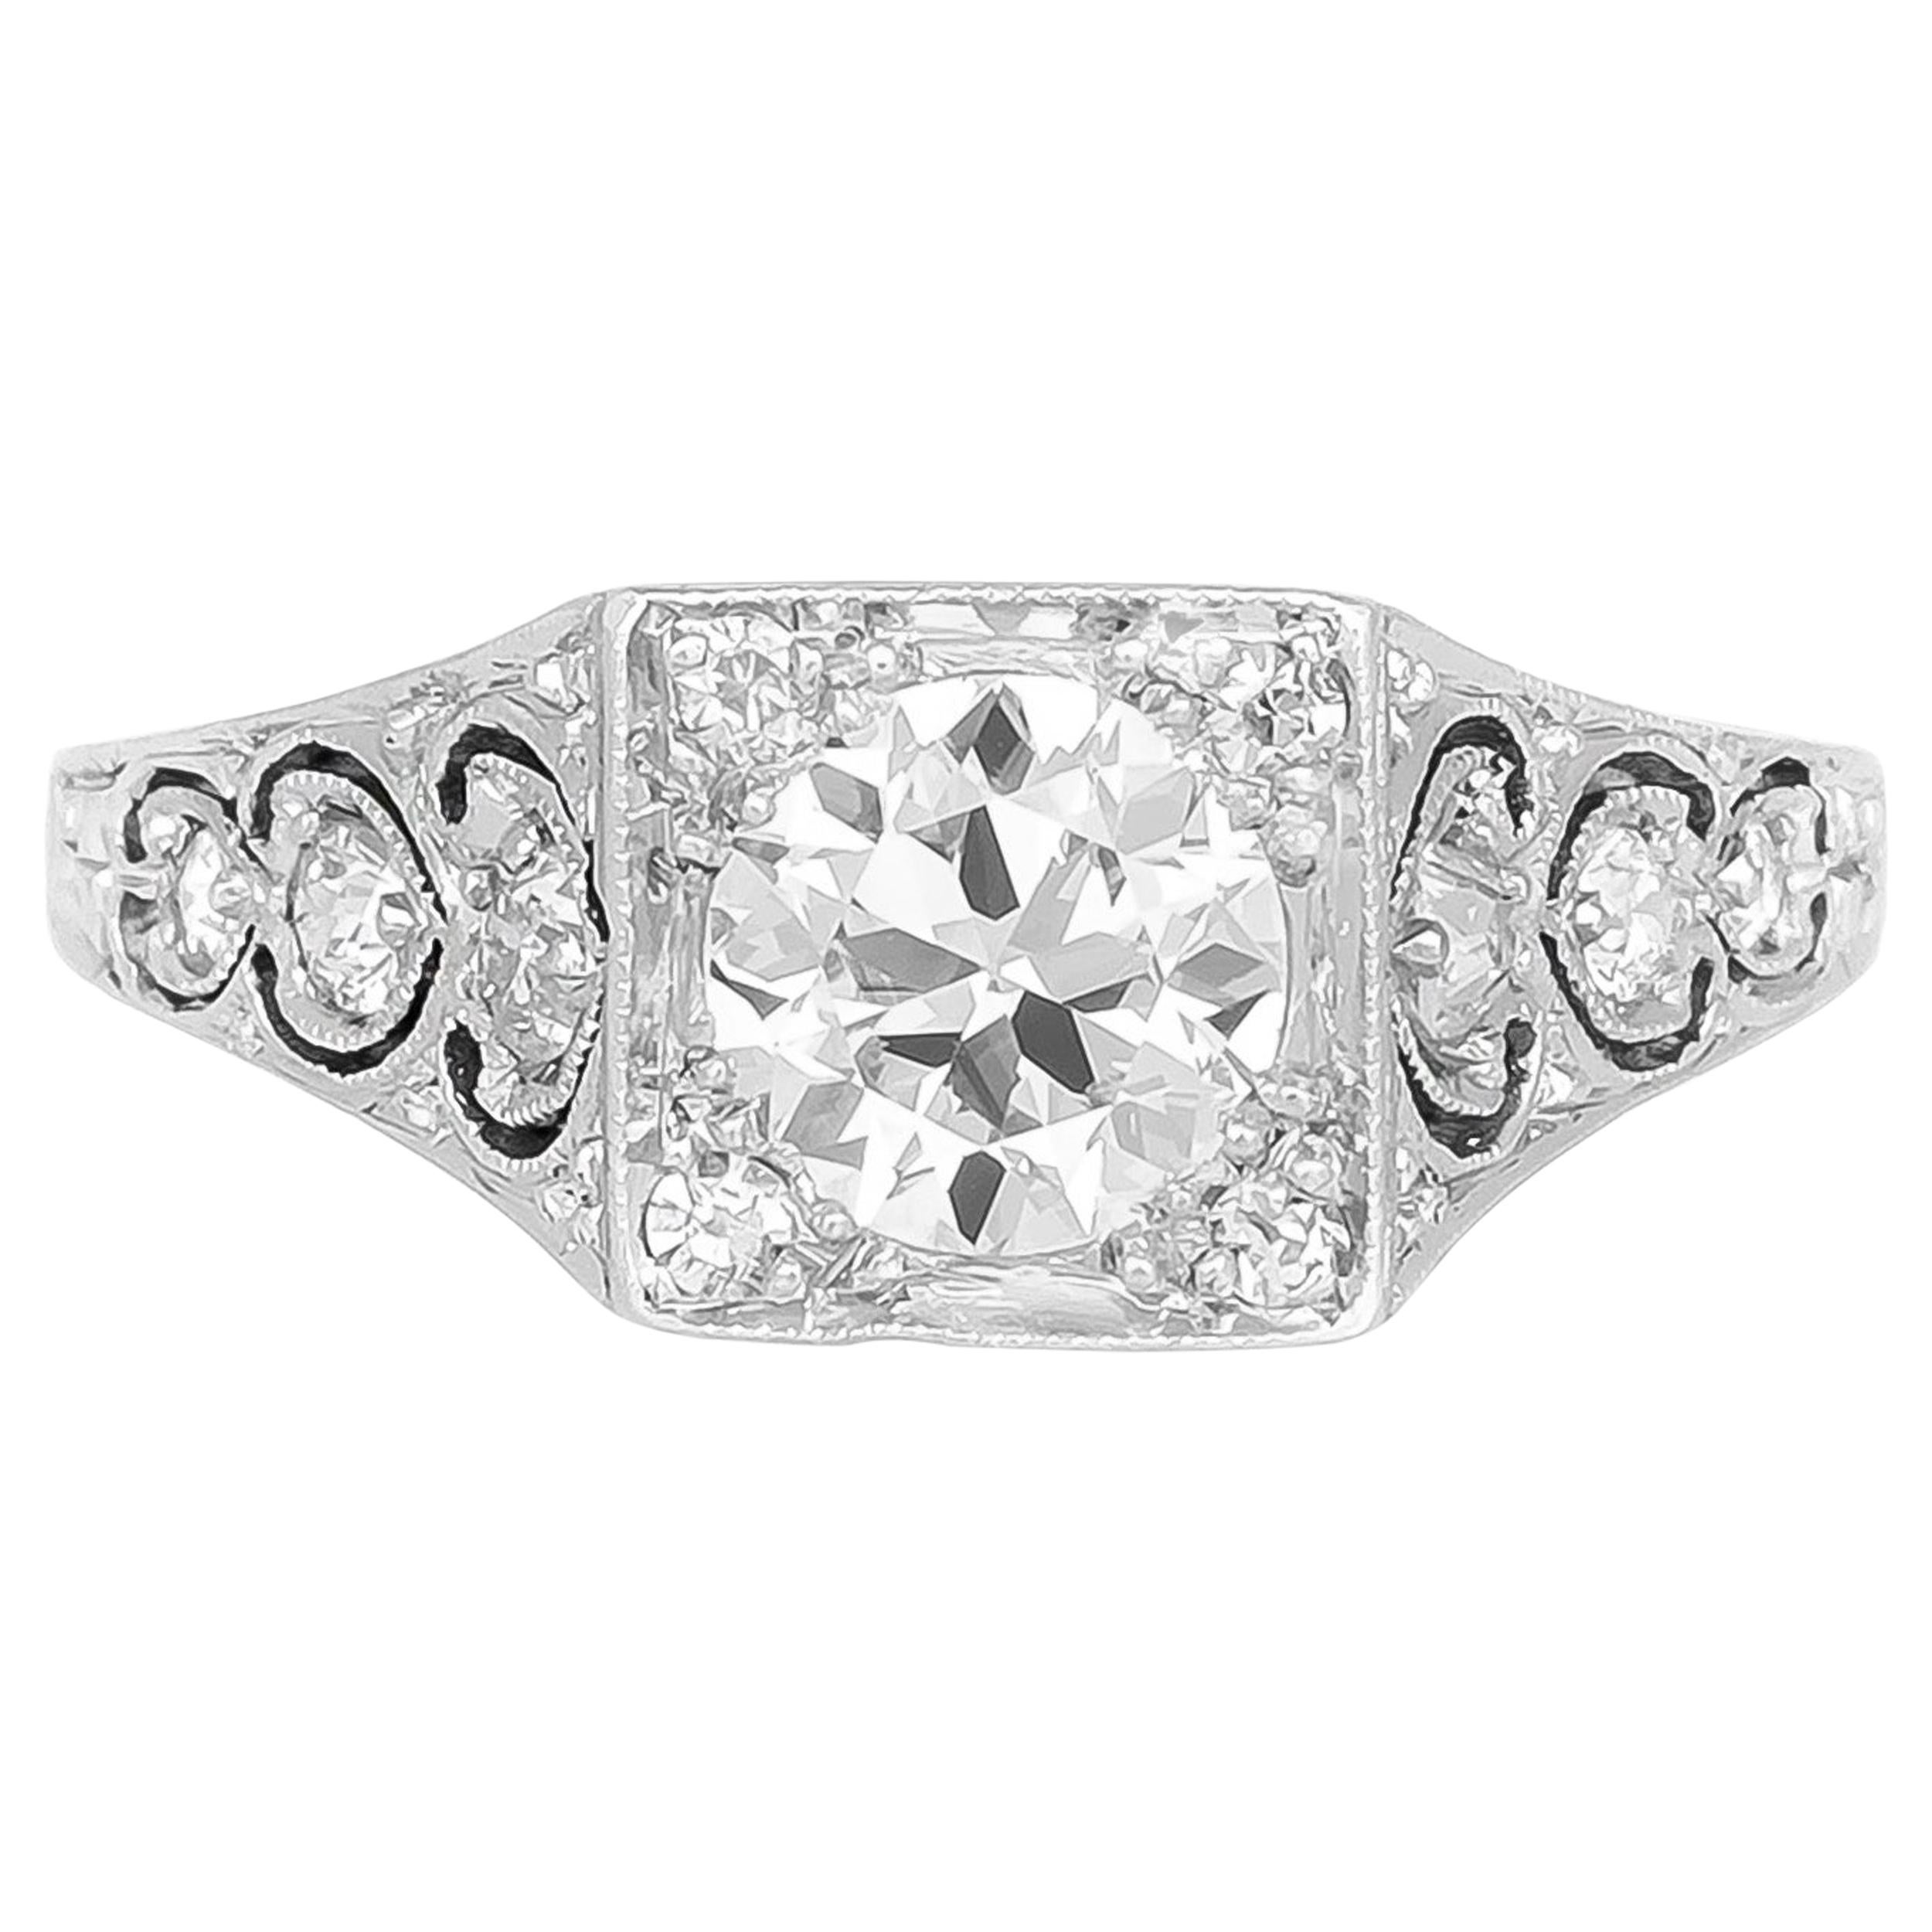 1920s-1930s Engagement Ring with Filigree and Beautiful Round Diamond For Sale